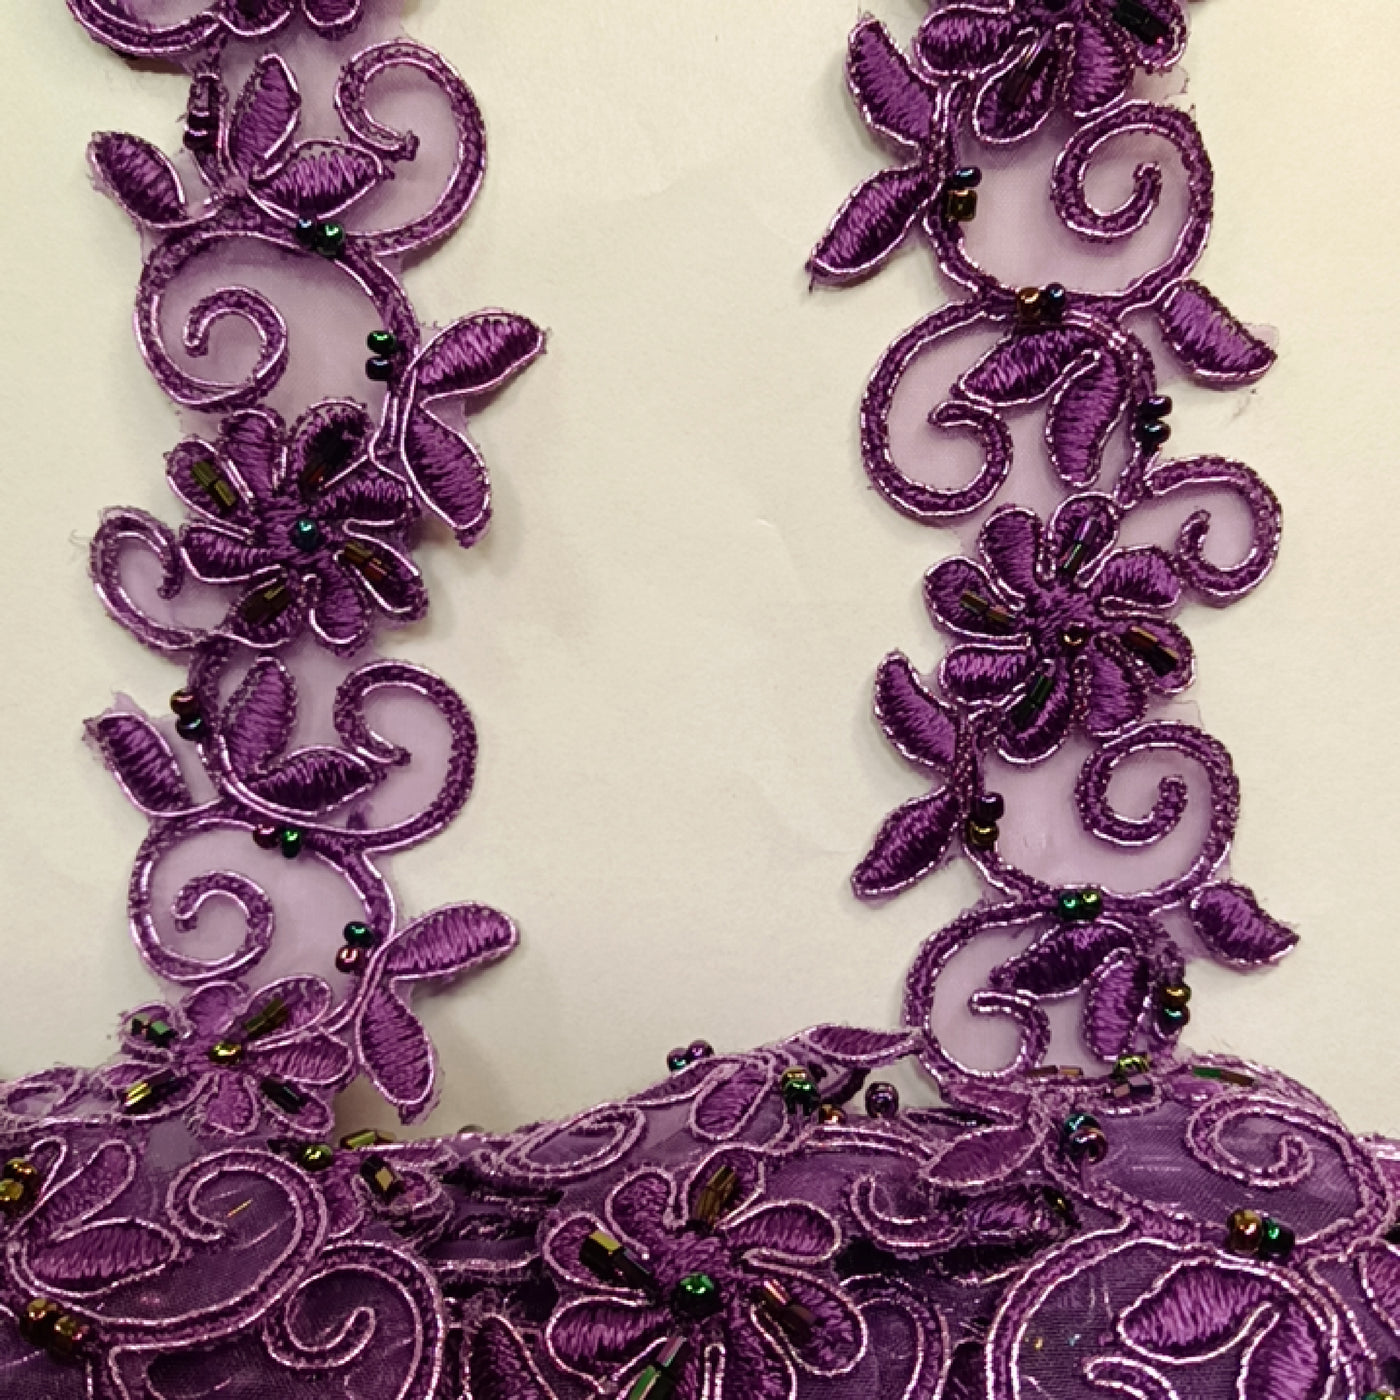 Beaded, Corded & Embroidered Metallic Purple Trimming. Lace Usa